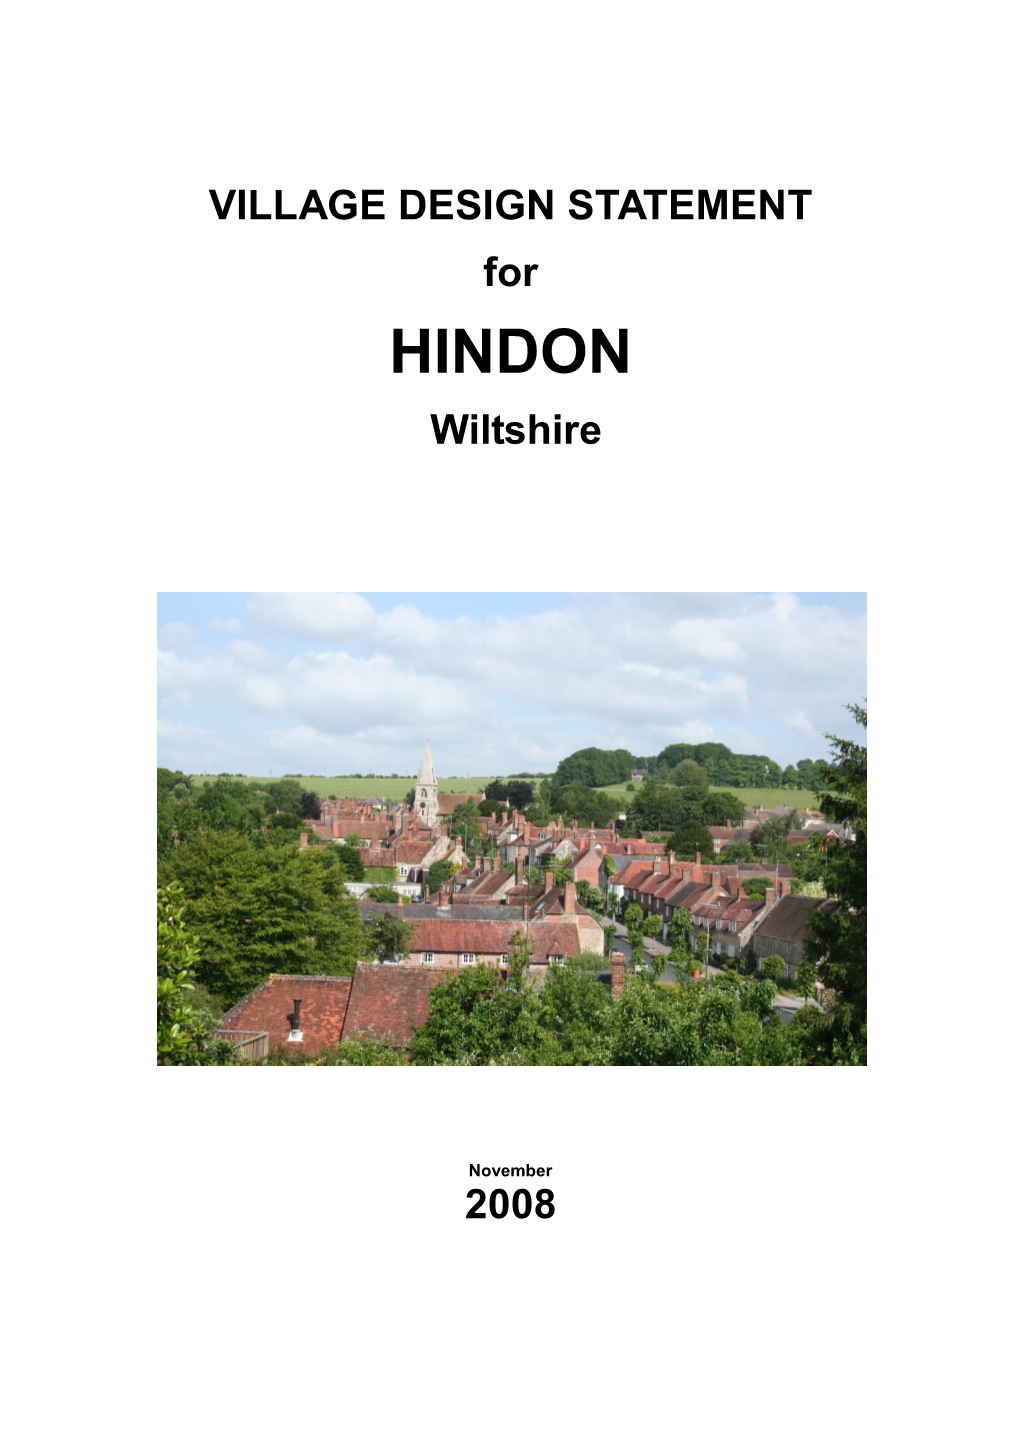 Hindon Village Design Statement Group Is Very Grateful for the Help and Encouragement Given By